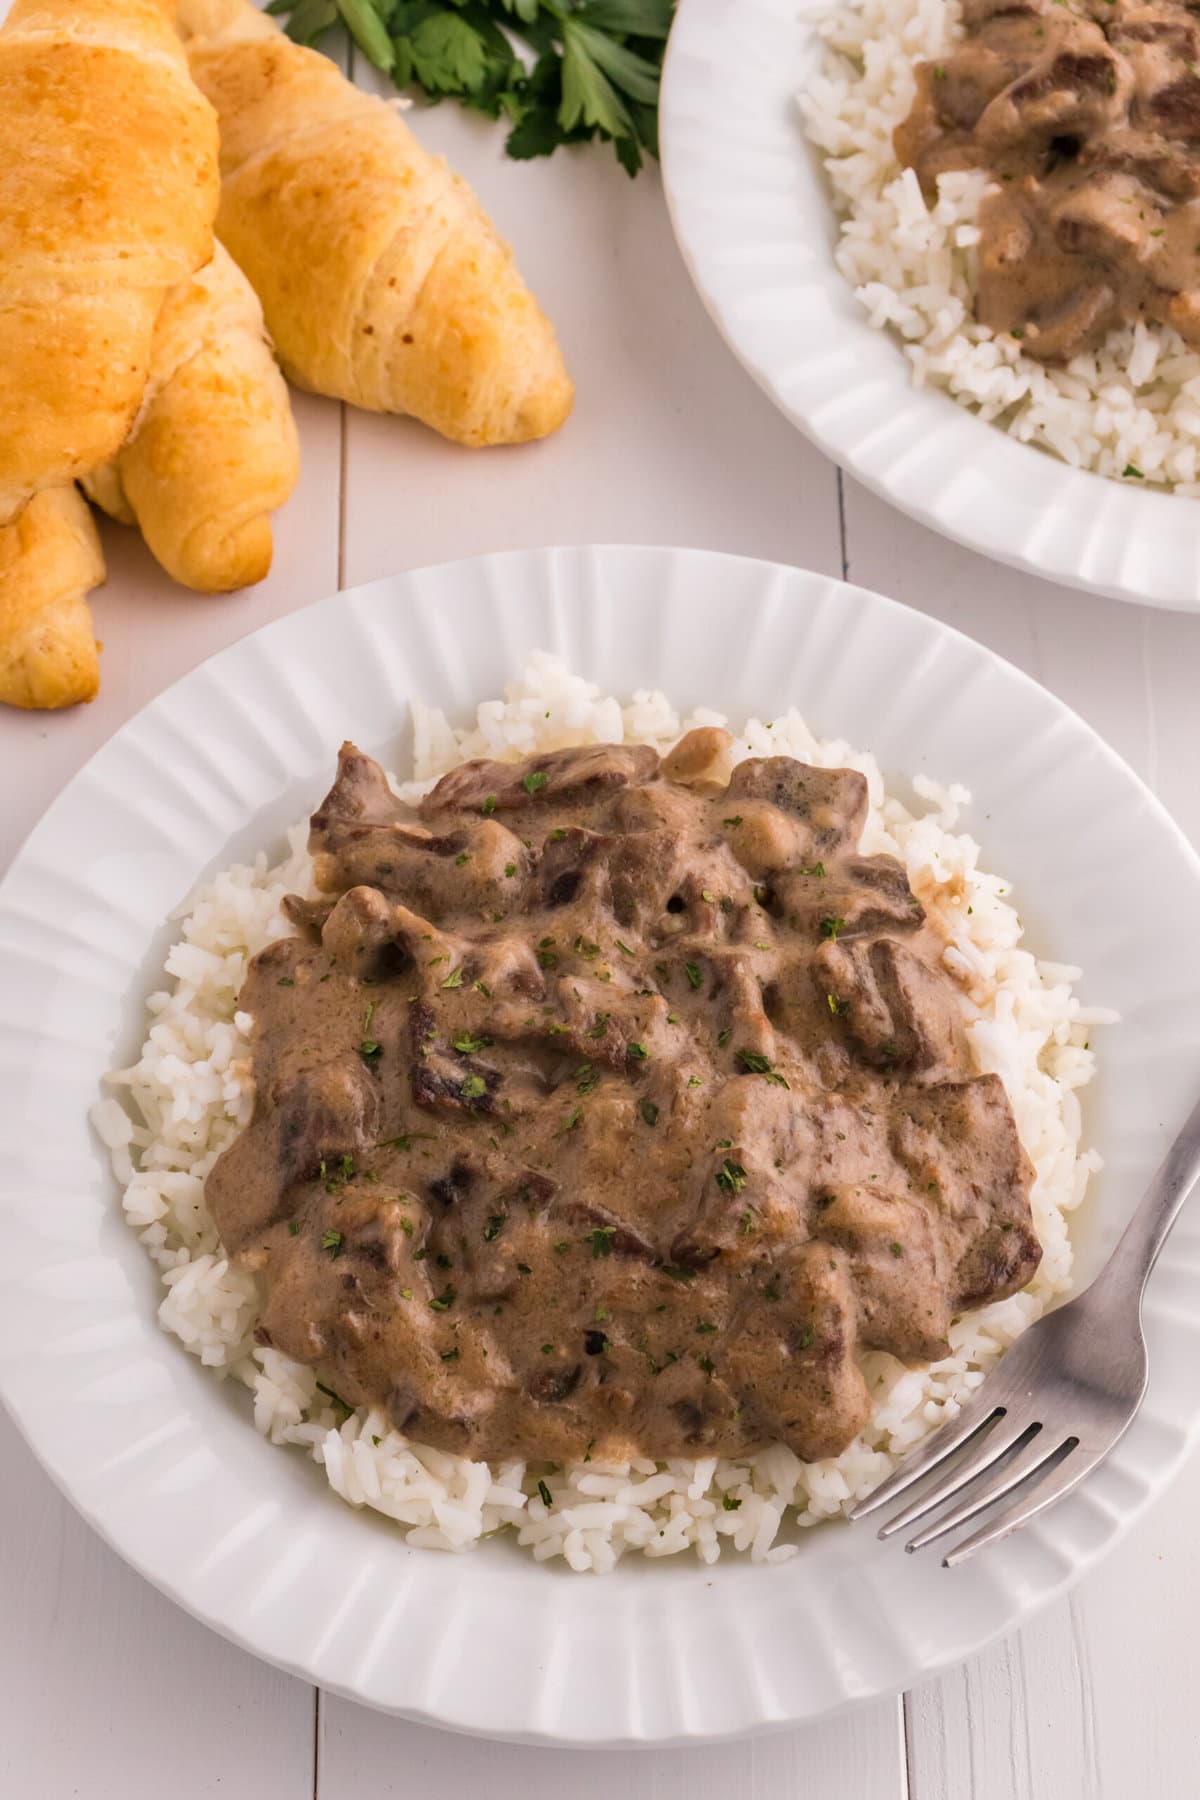 Beef Tips and Rice with croissants on the side.